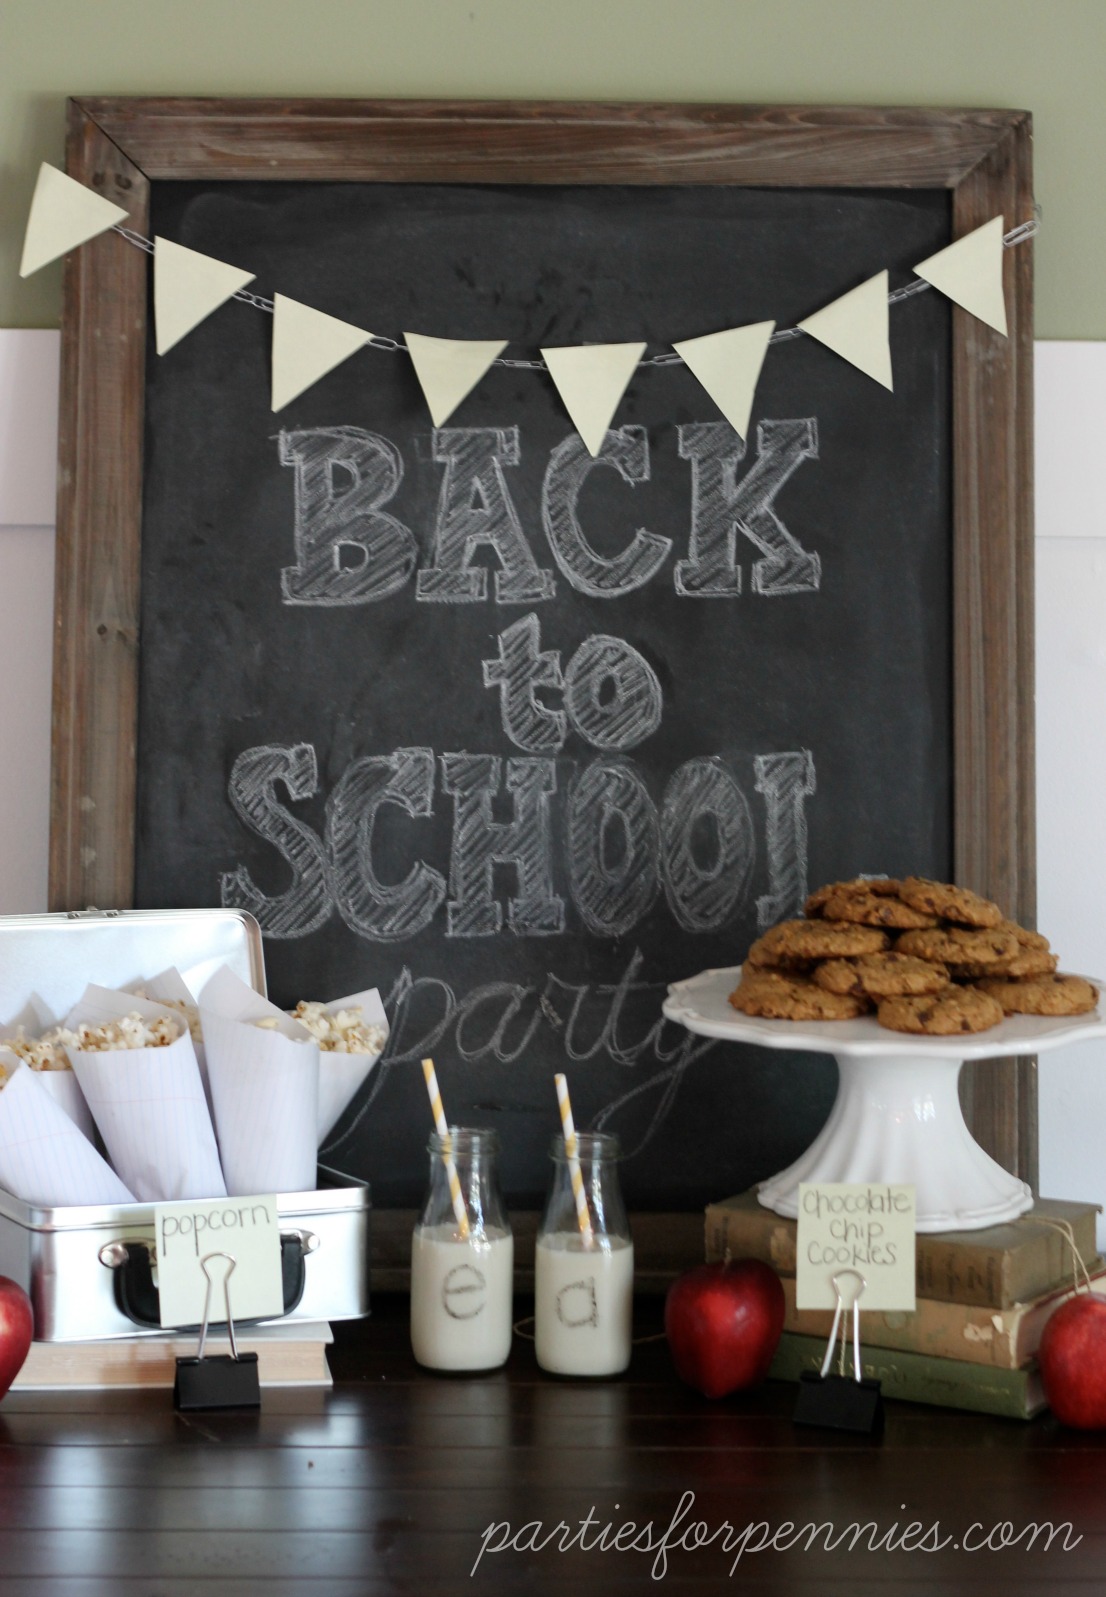 Back to School Party - Parties For Pennies